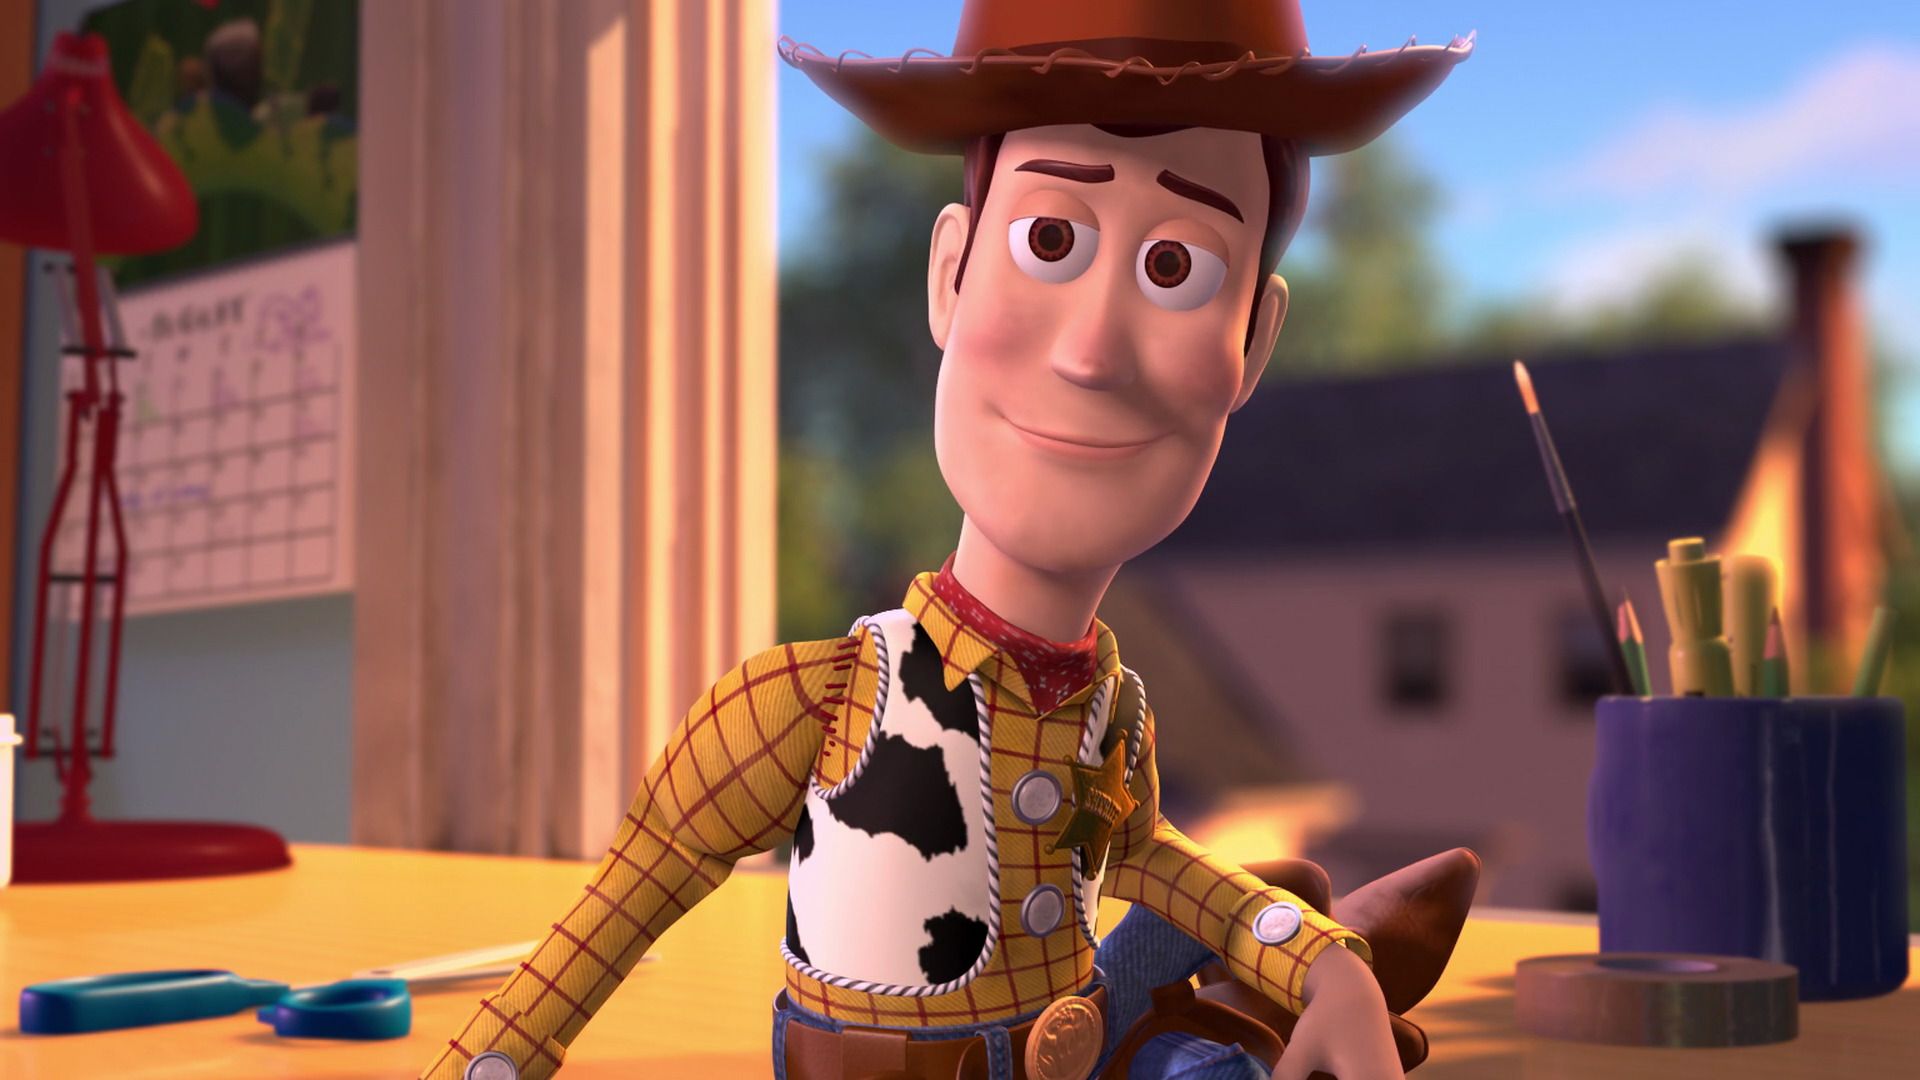 MBTI® of Toy Story Characters